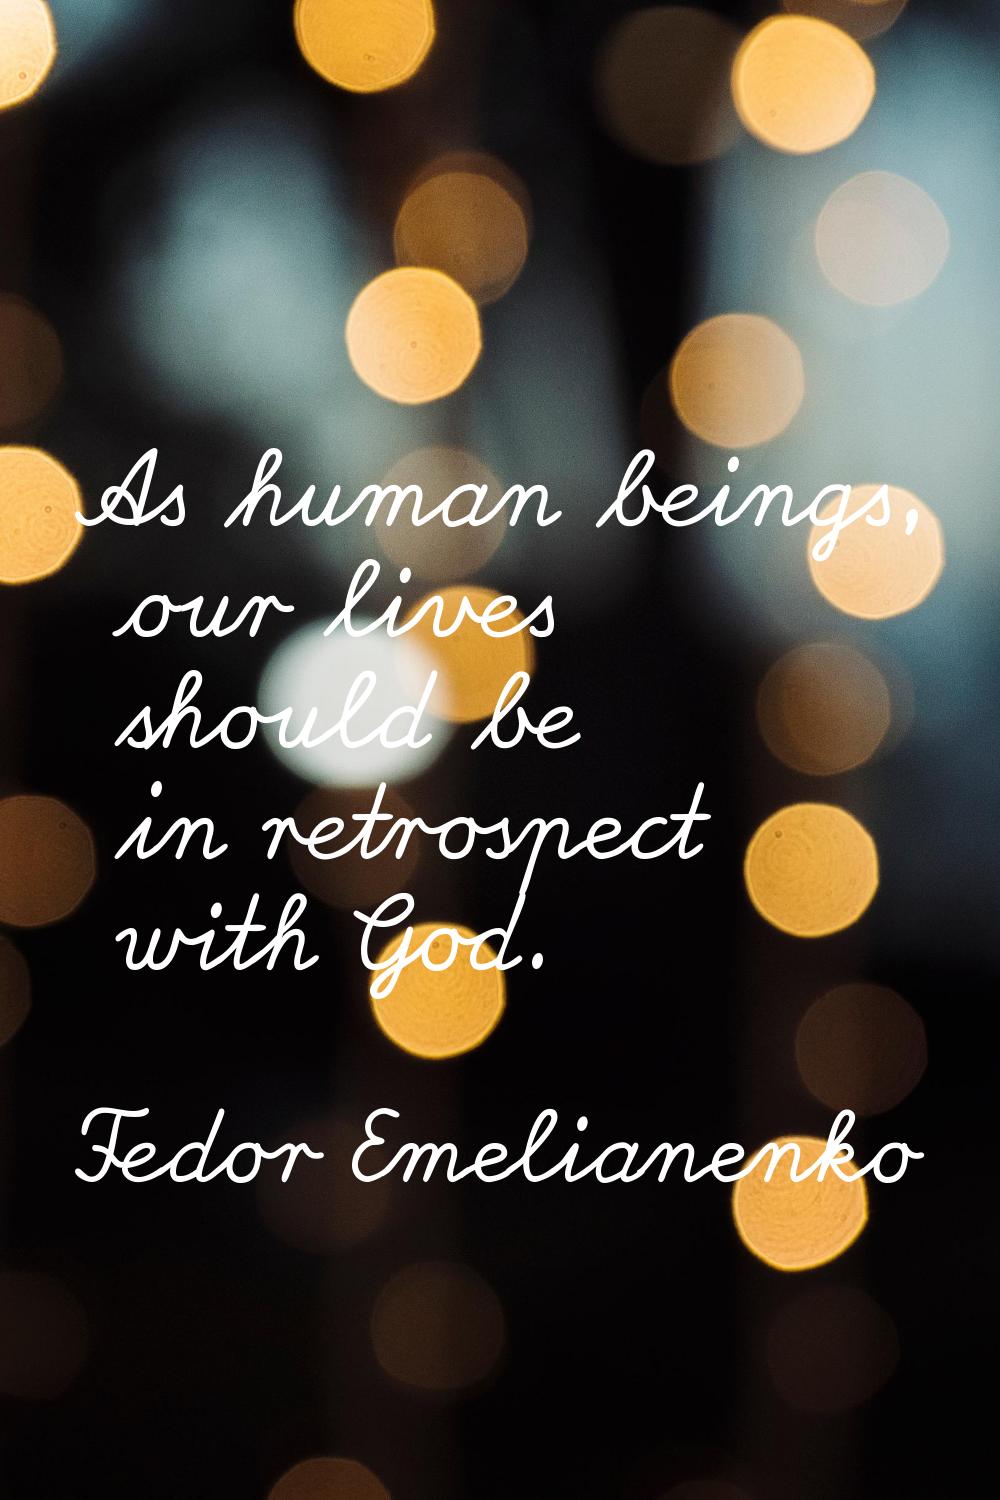 As human beings, our lives should be in retrospect with God.